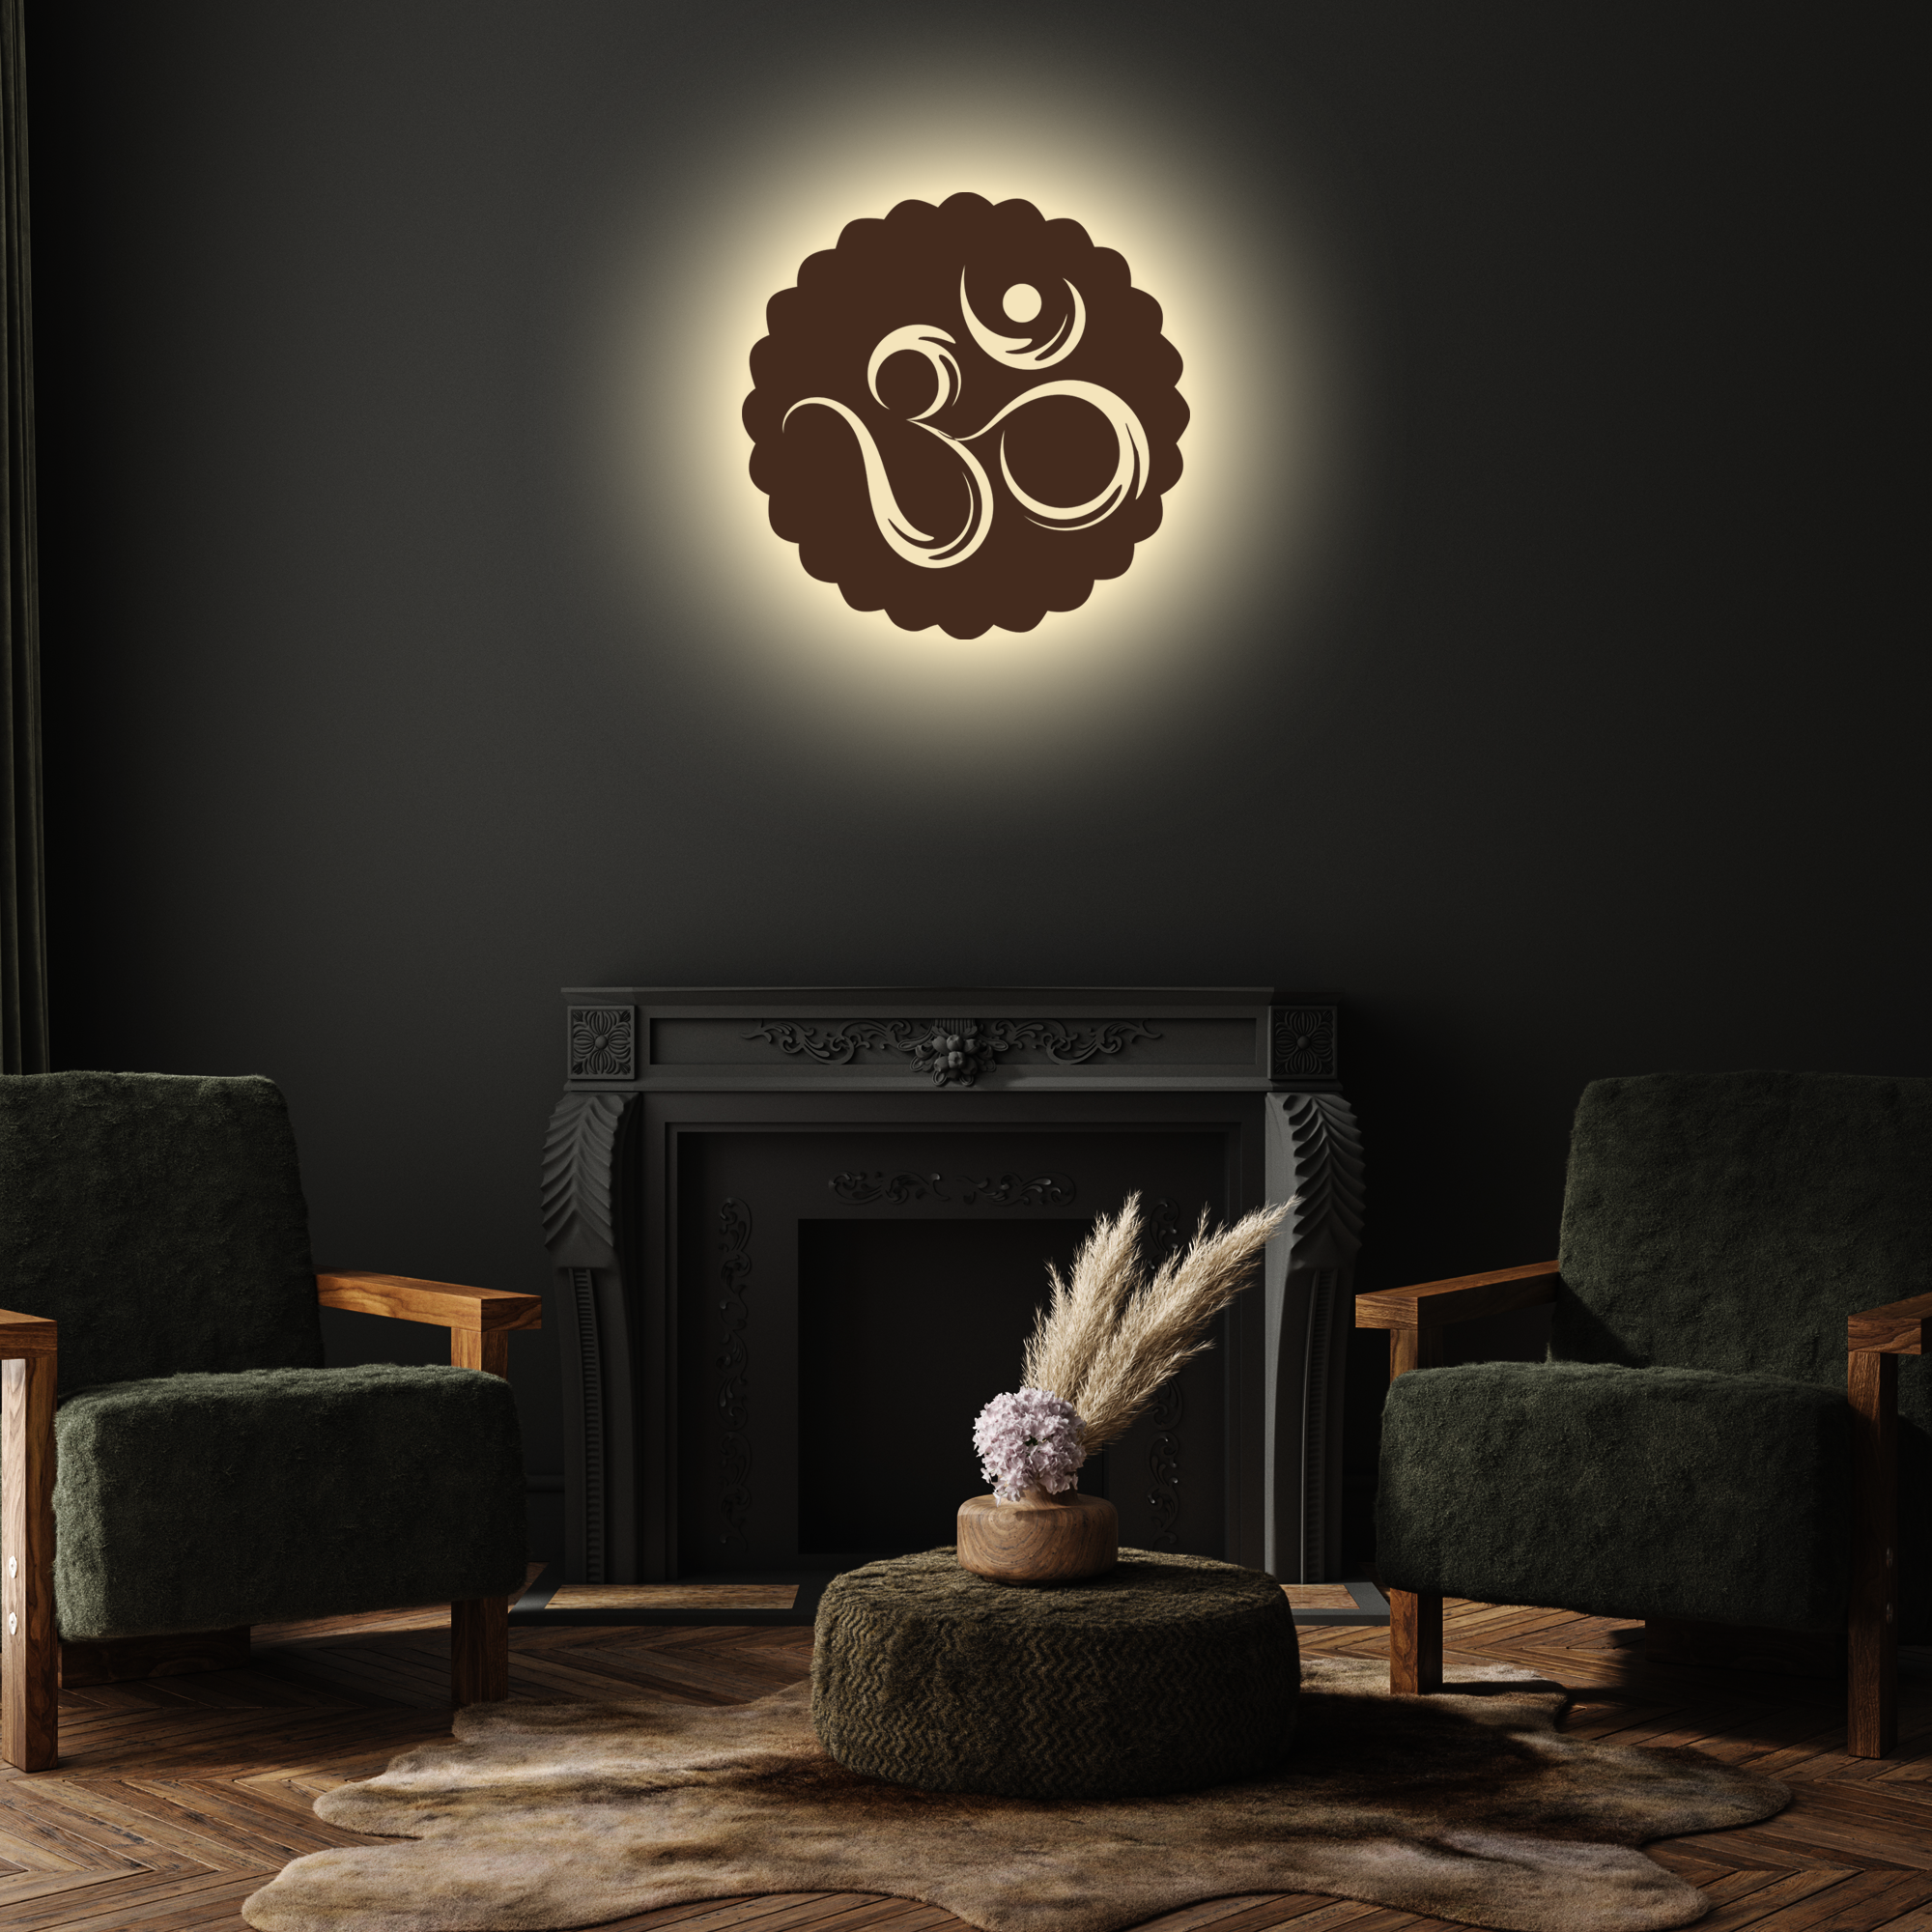 OM Round Backlit Wooden Wall Decor with Walnut Finish